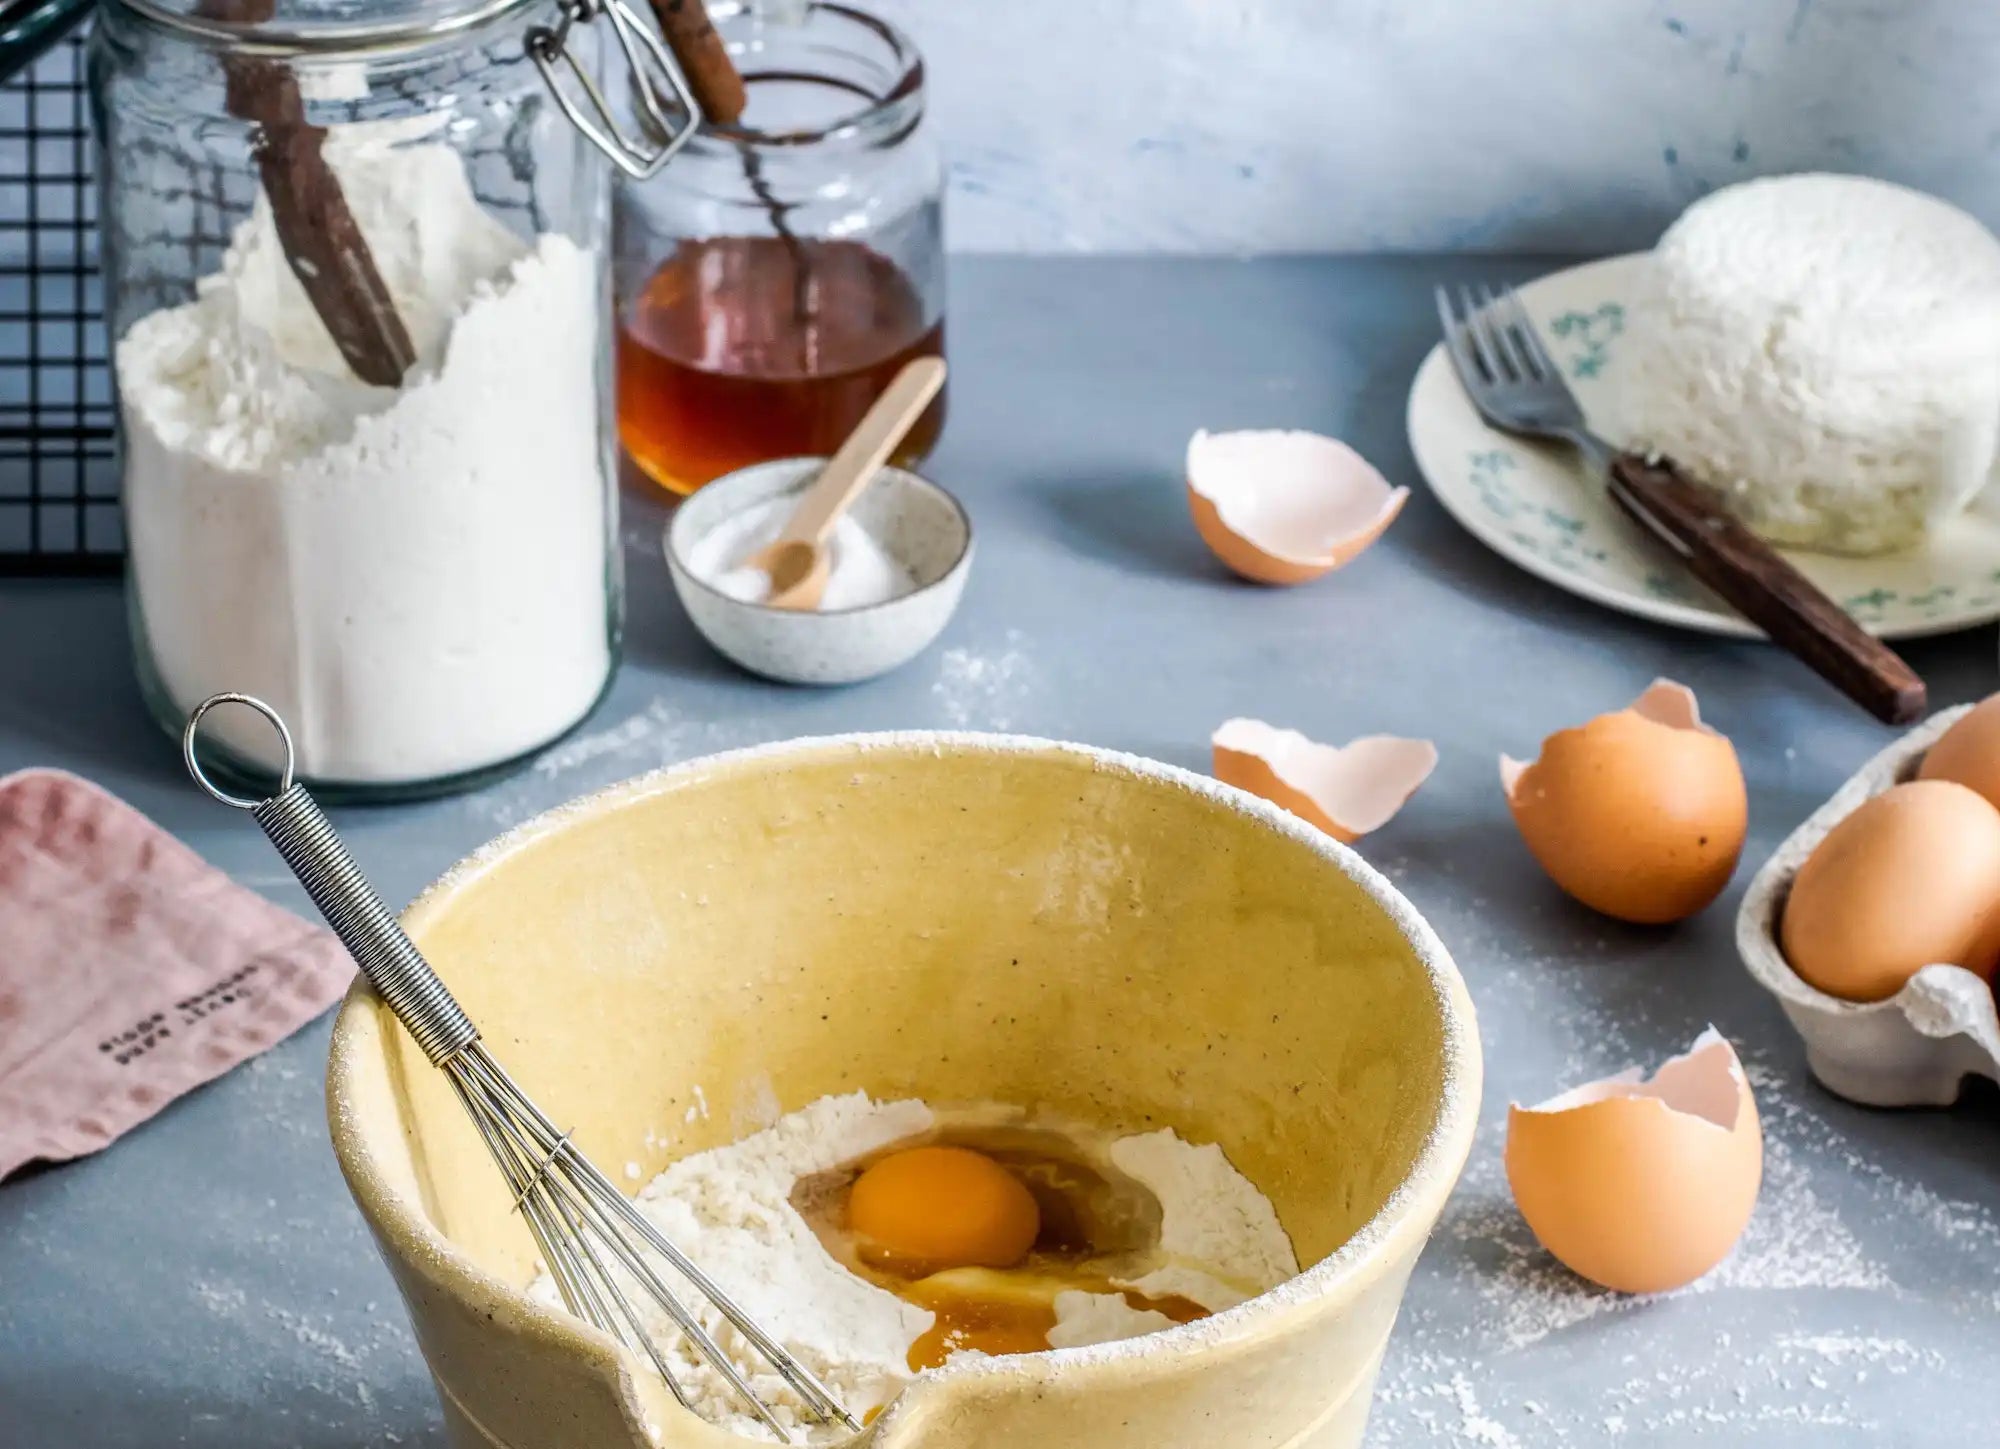 delightfully messy baking station with honey, flour, and a bowl of flour and eggs